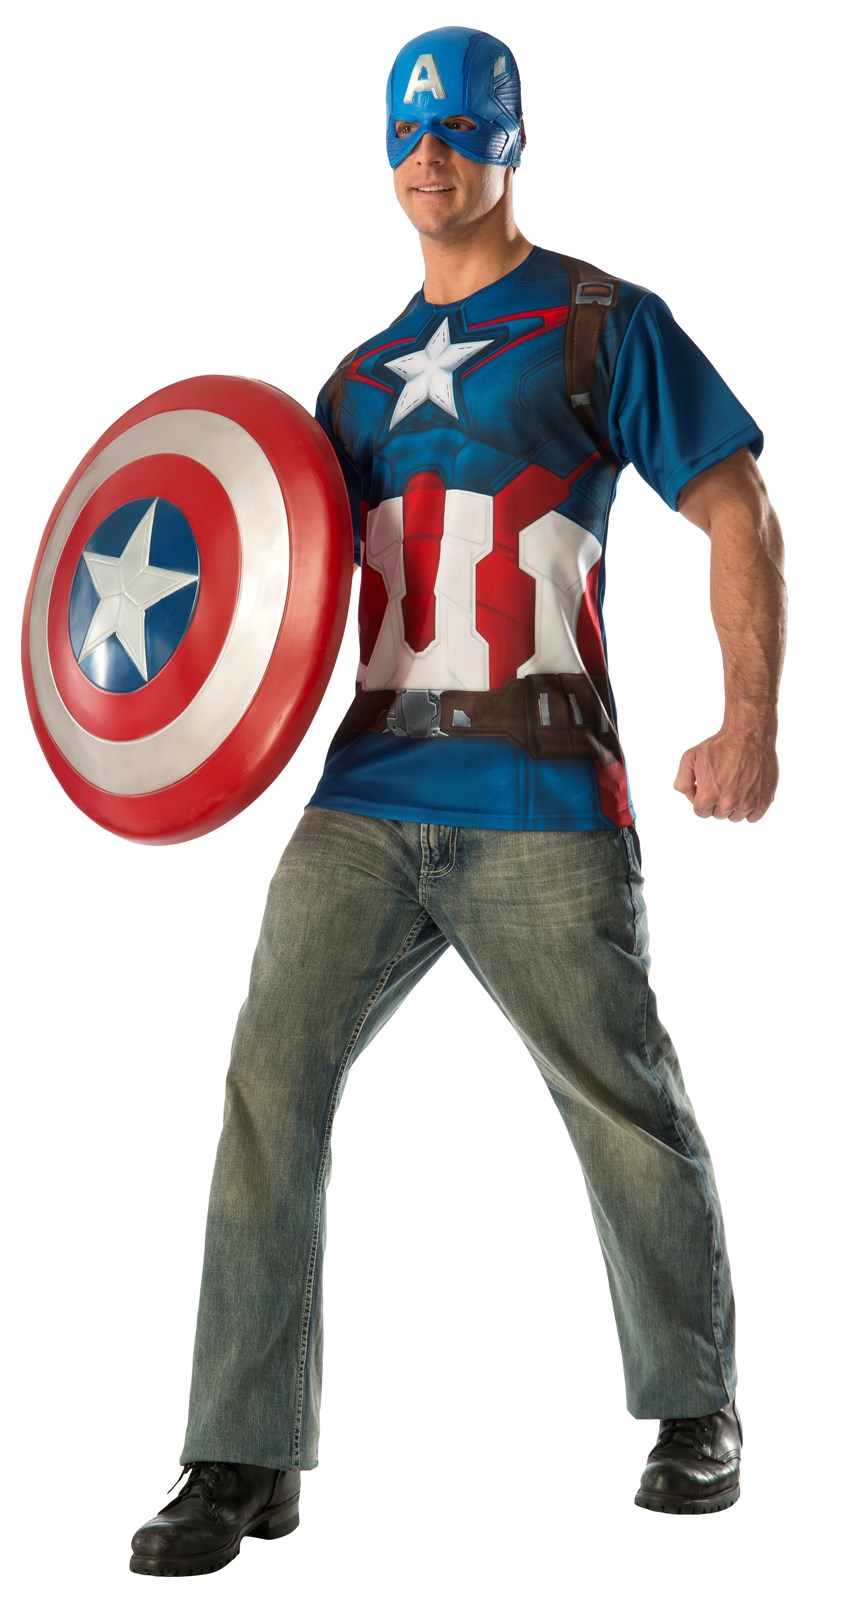 Avengers 2 - Age of Ultron: Captain America Adult T-Shirt